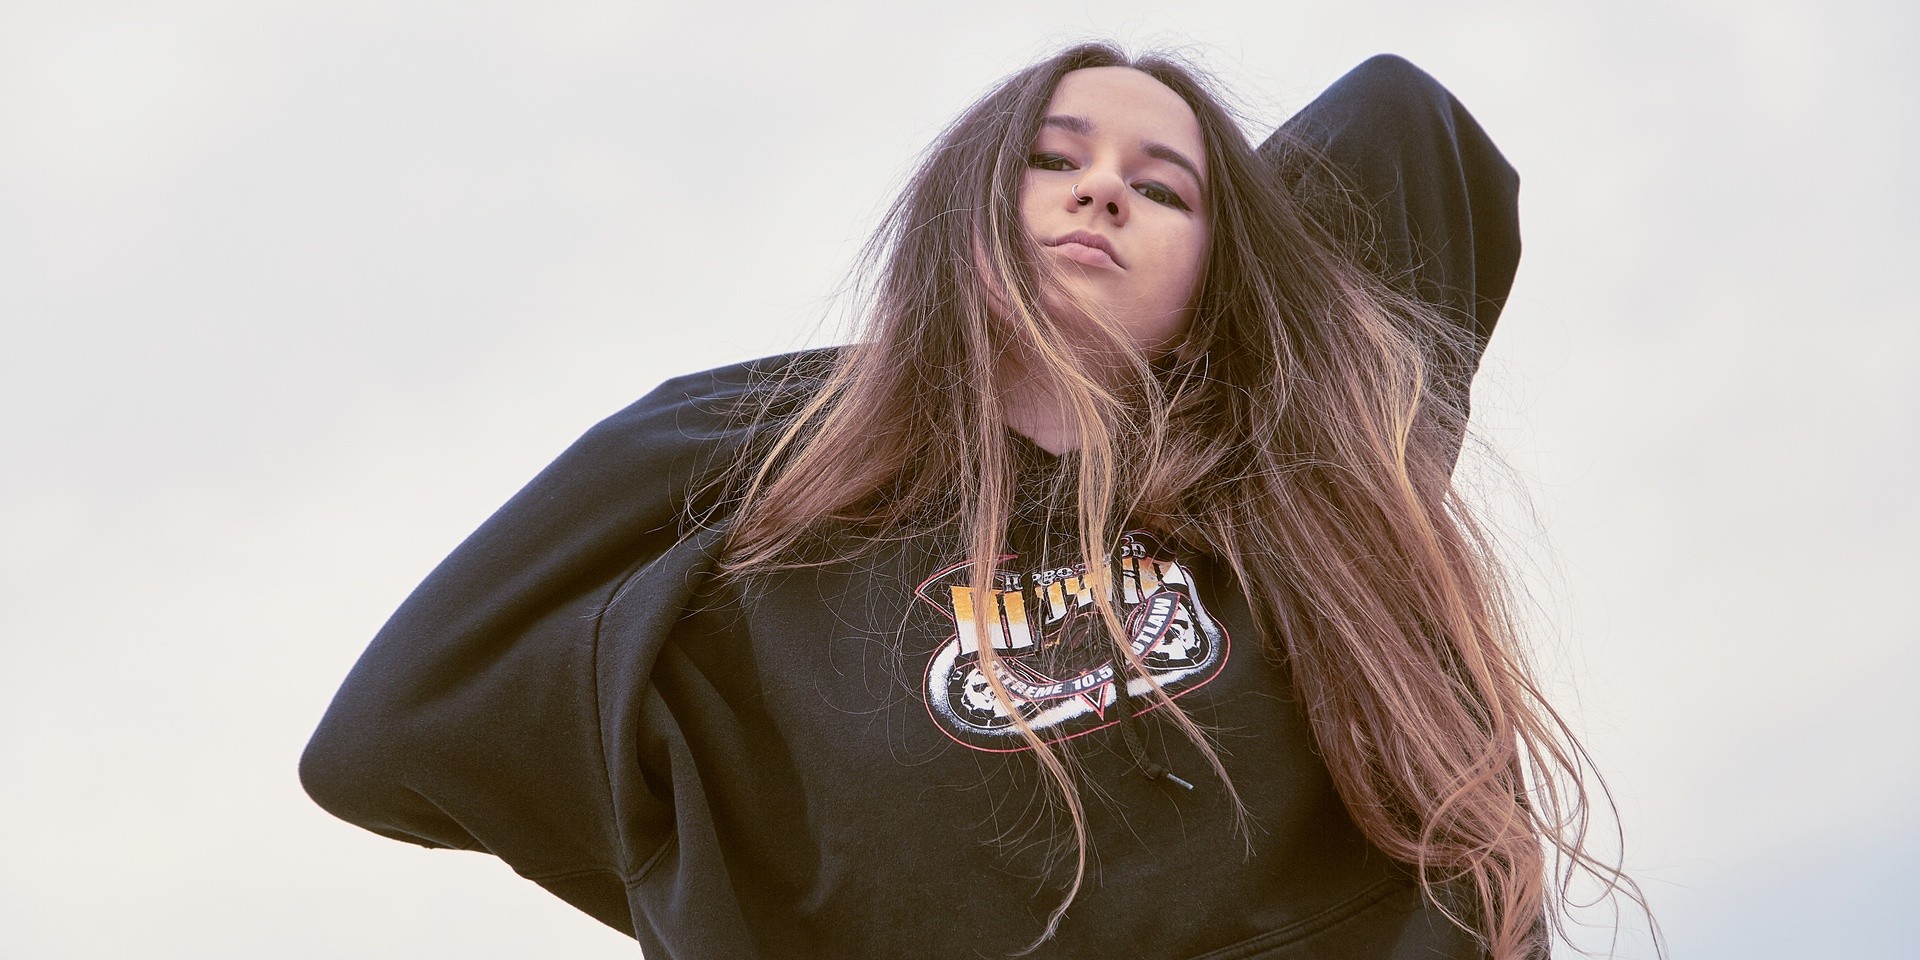 MALLRAT to perform in Singapore in May